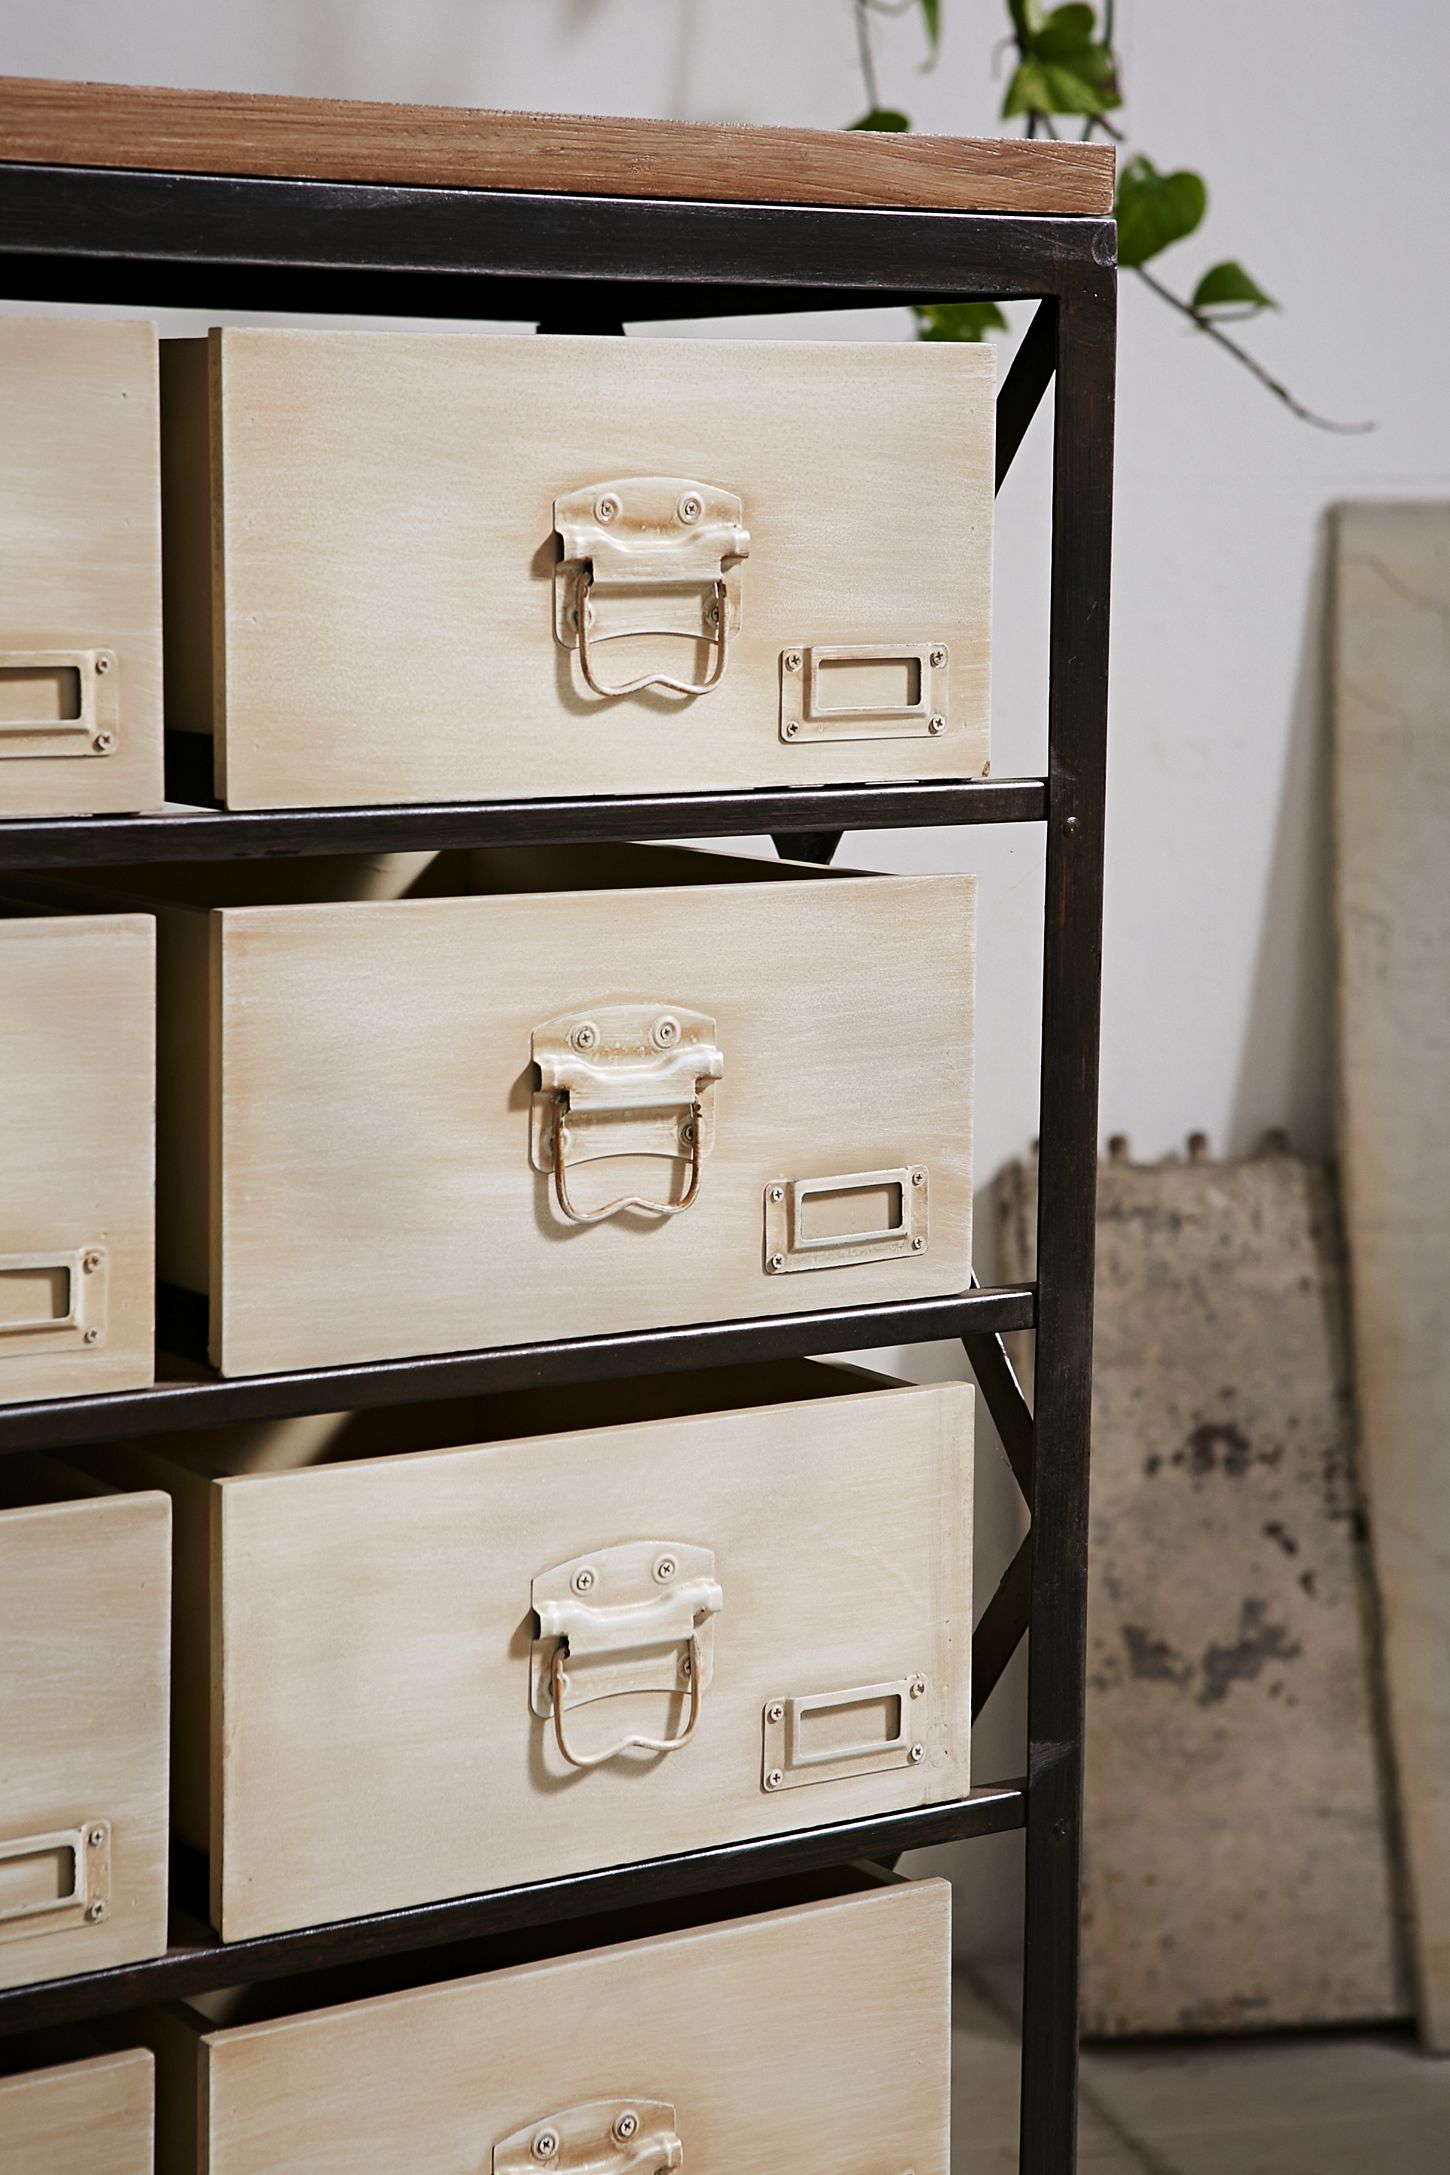 Industrial Storage Dresser Urban Outfitters